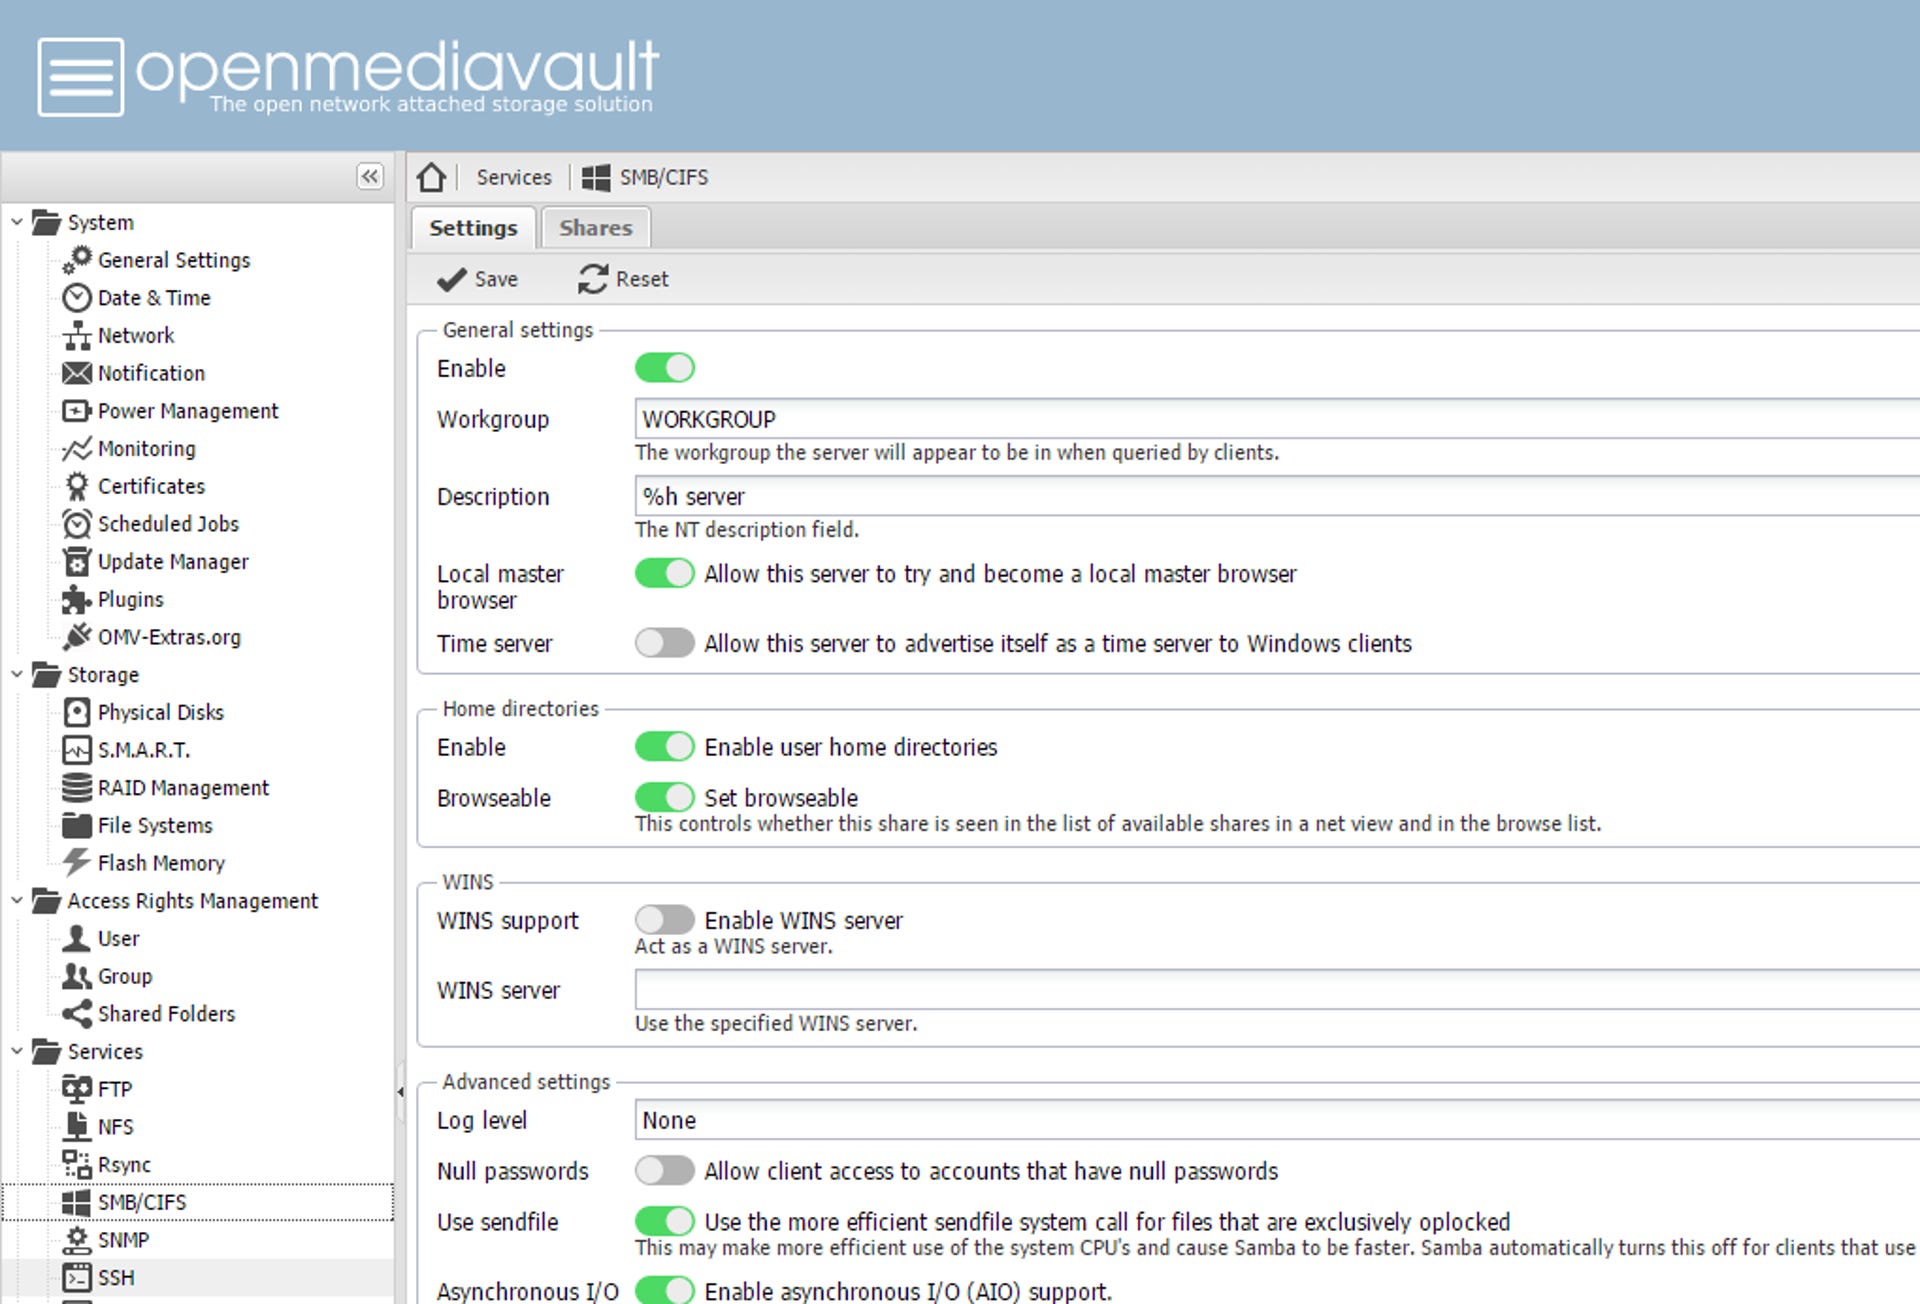 openmediavault-smb-raspberry-pi.png